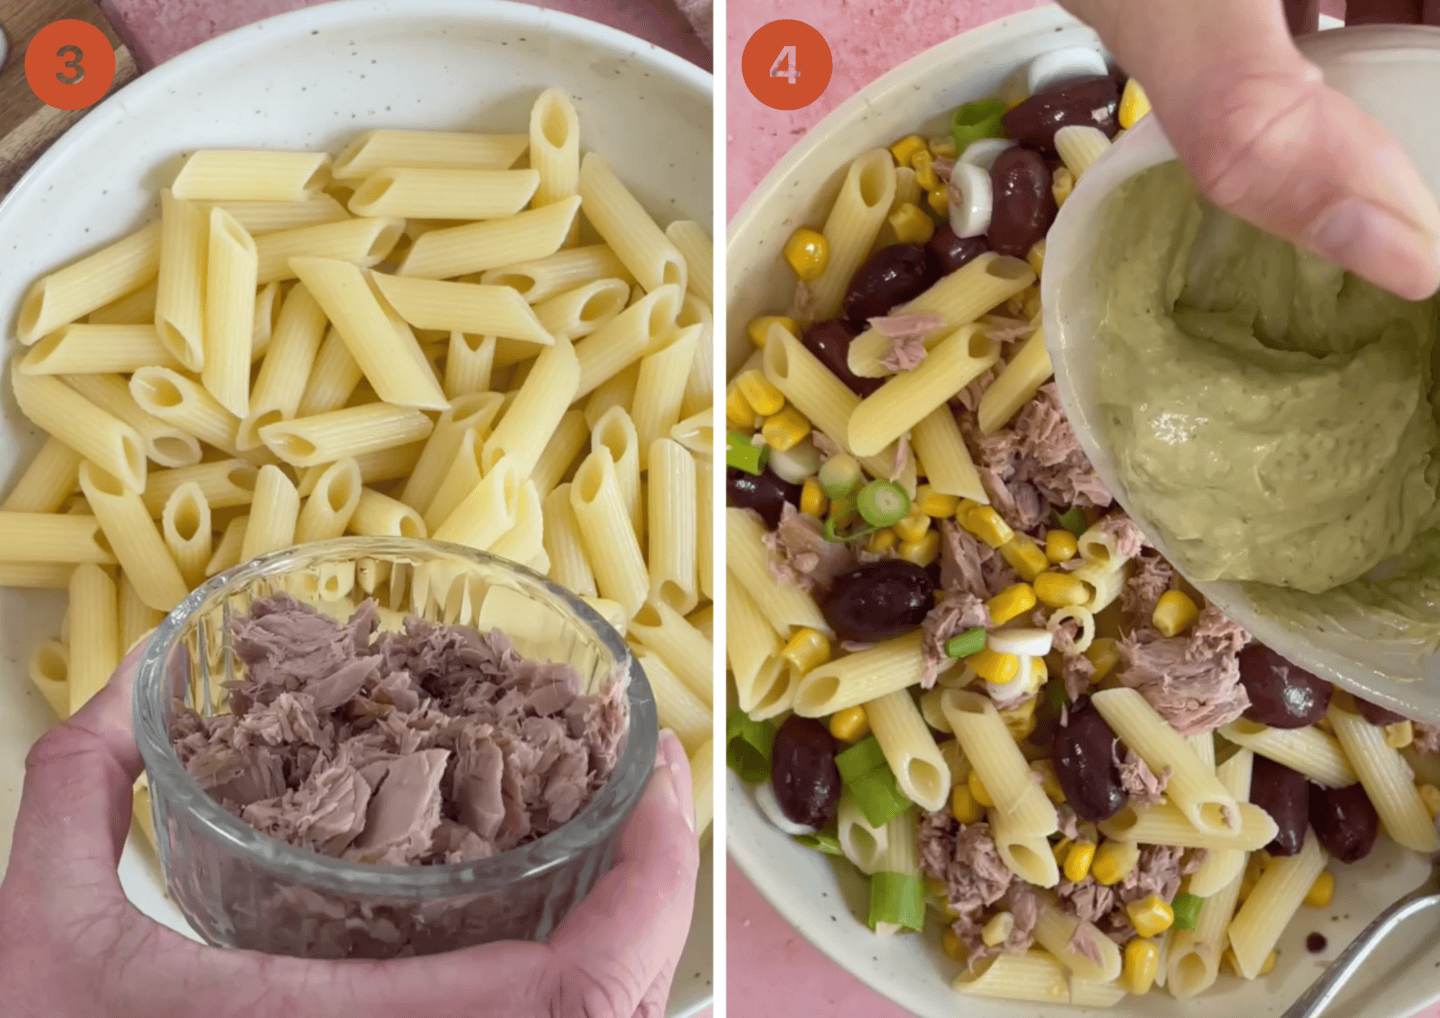 (Left) add the ingredients to the tuna pasta salad and (right) add the pesto mayonnaise.